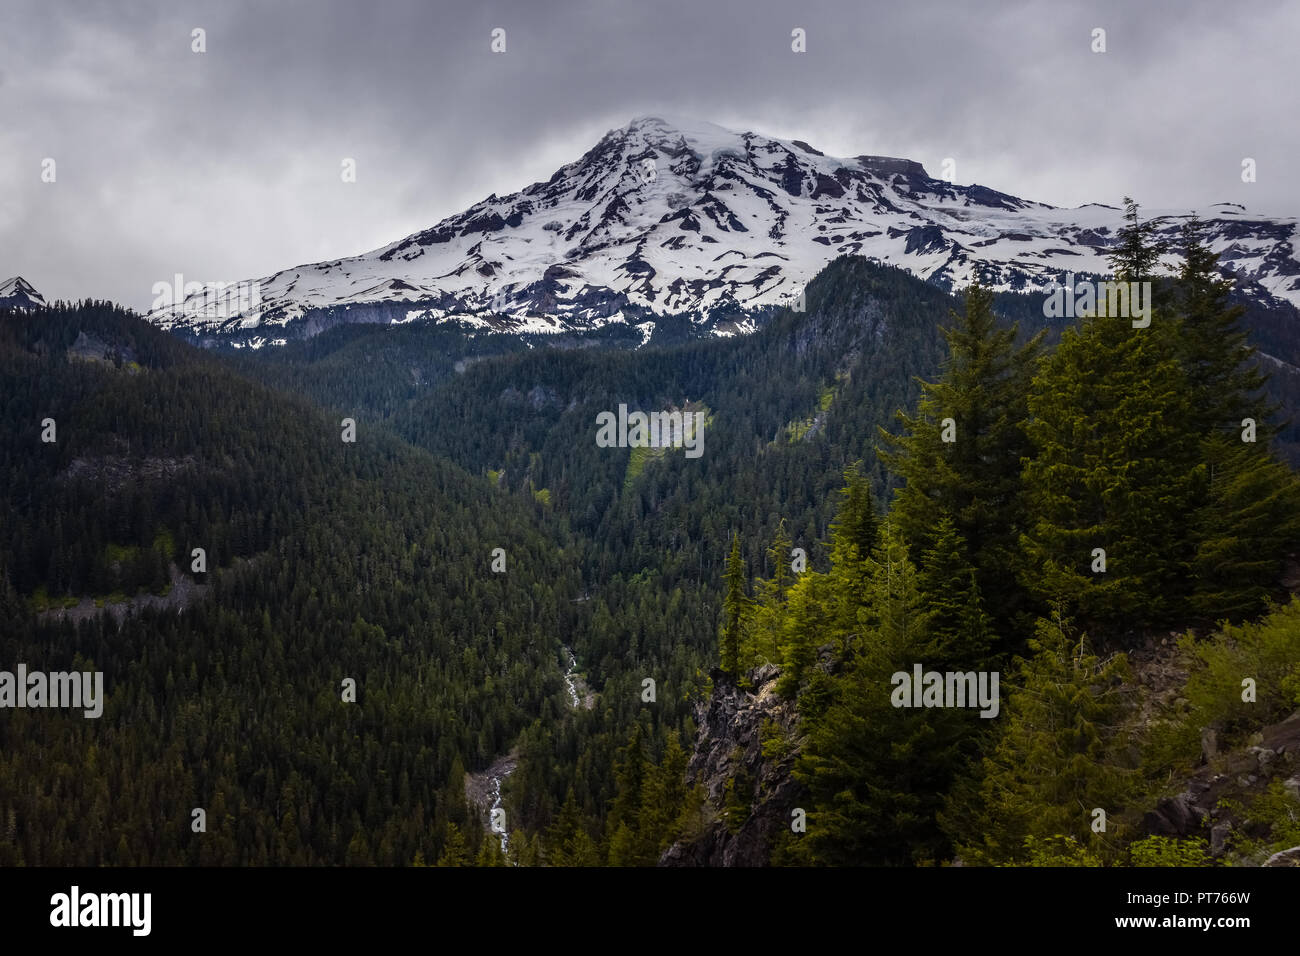 Scenic overlook at Mount Rainier National Park with Mt Rainier covered with snow on a cloudy gloomy day, Washington state, USA. Stock Photo